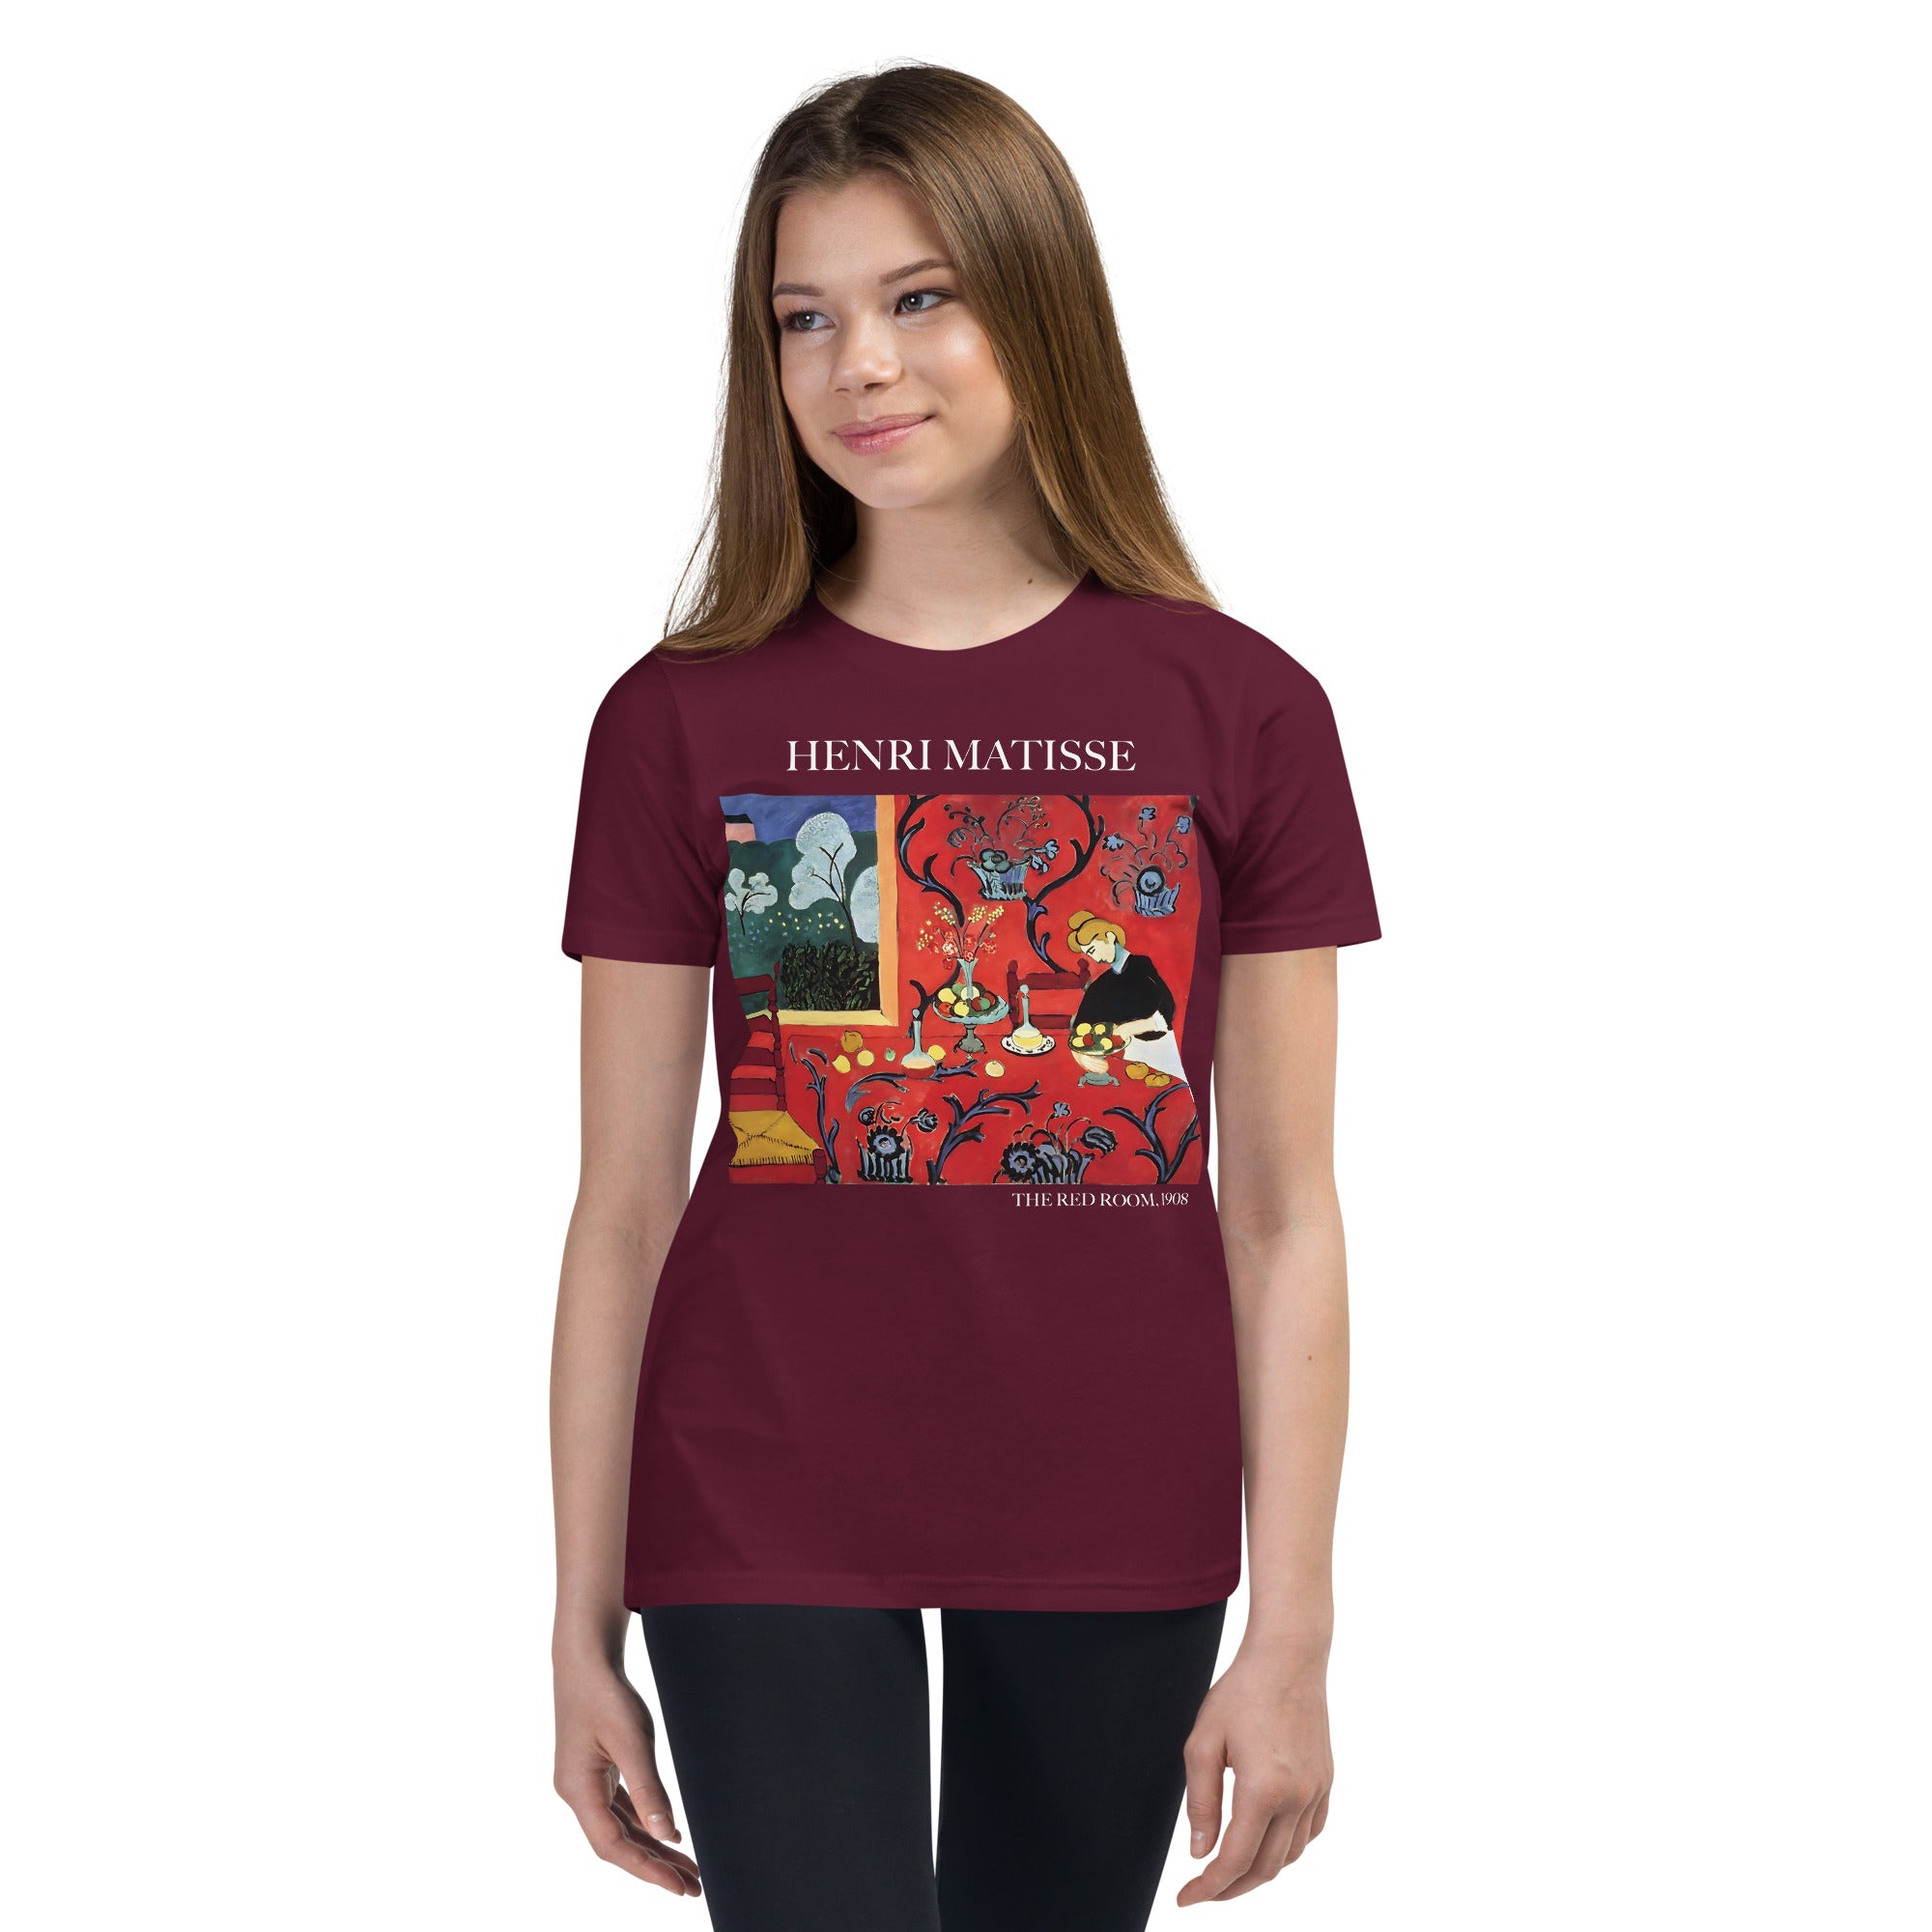 Henri Matisse 'The Red Room' Famous Painting Short Sleeve T-Shirt | Premium Youth Art Tee